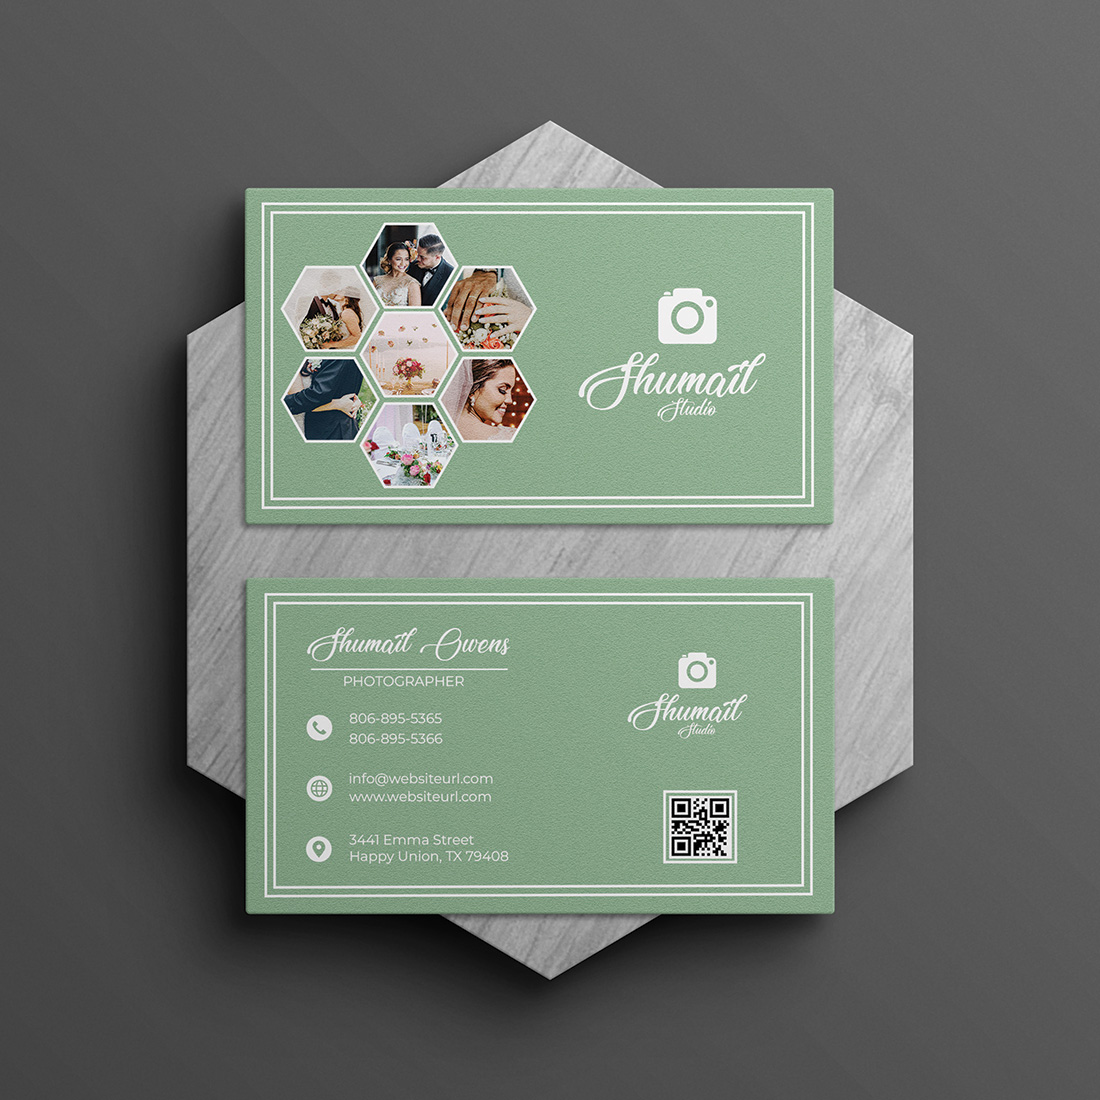 Image of gorgeous photographer business card template.